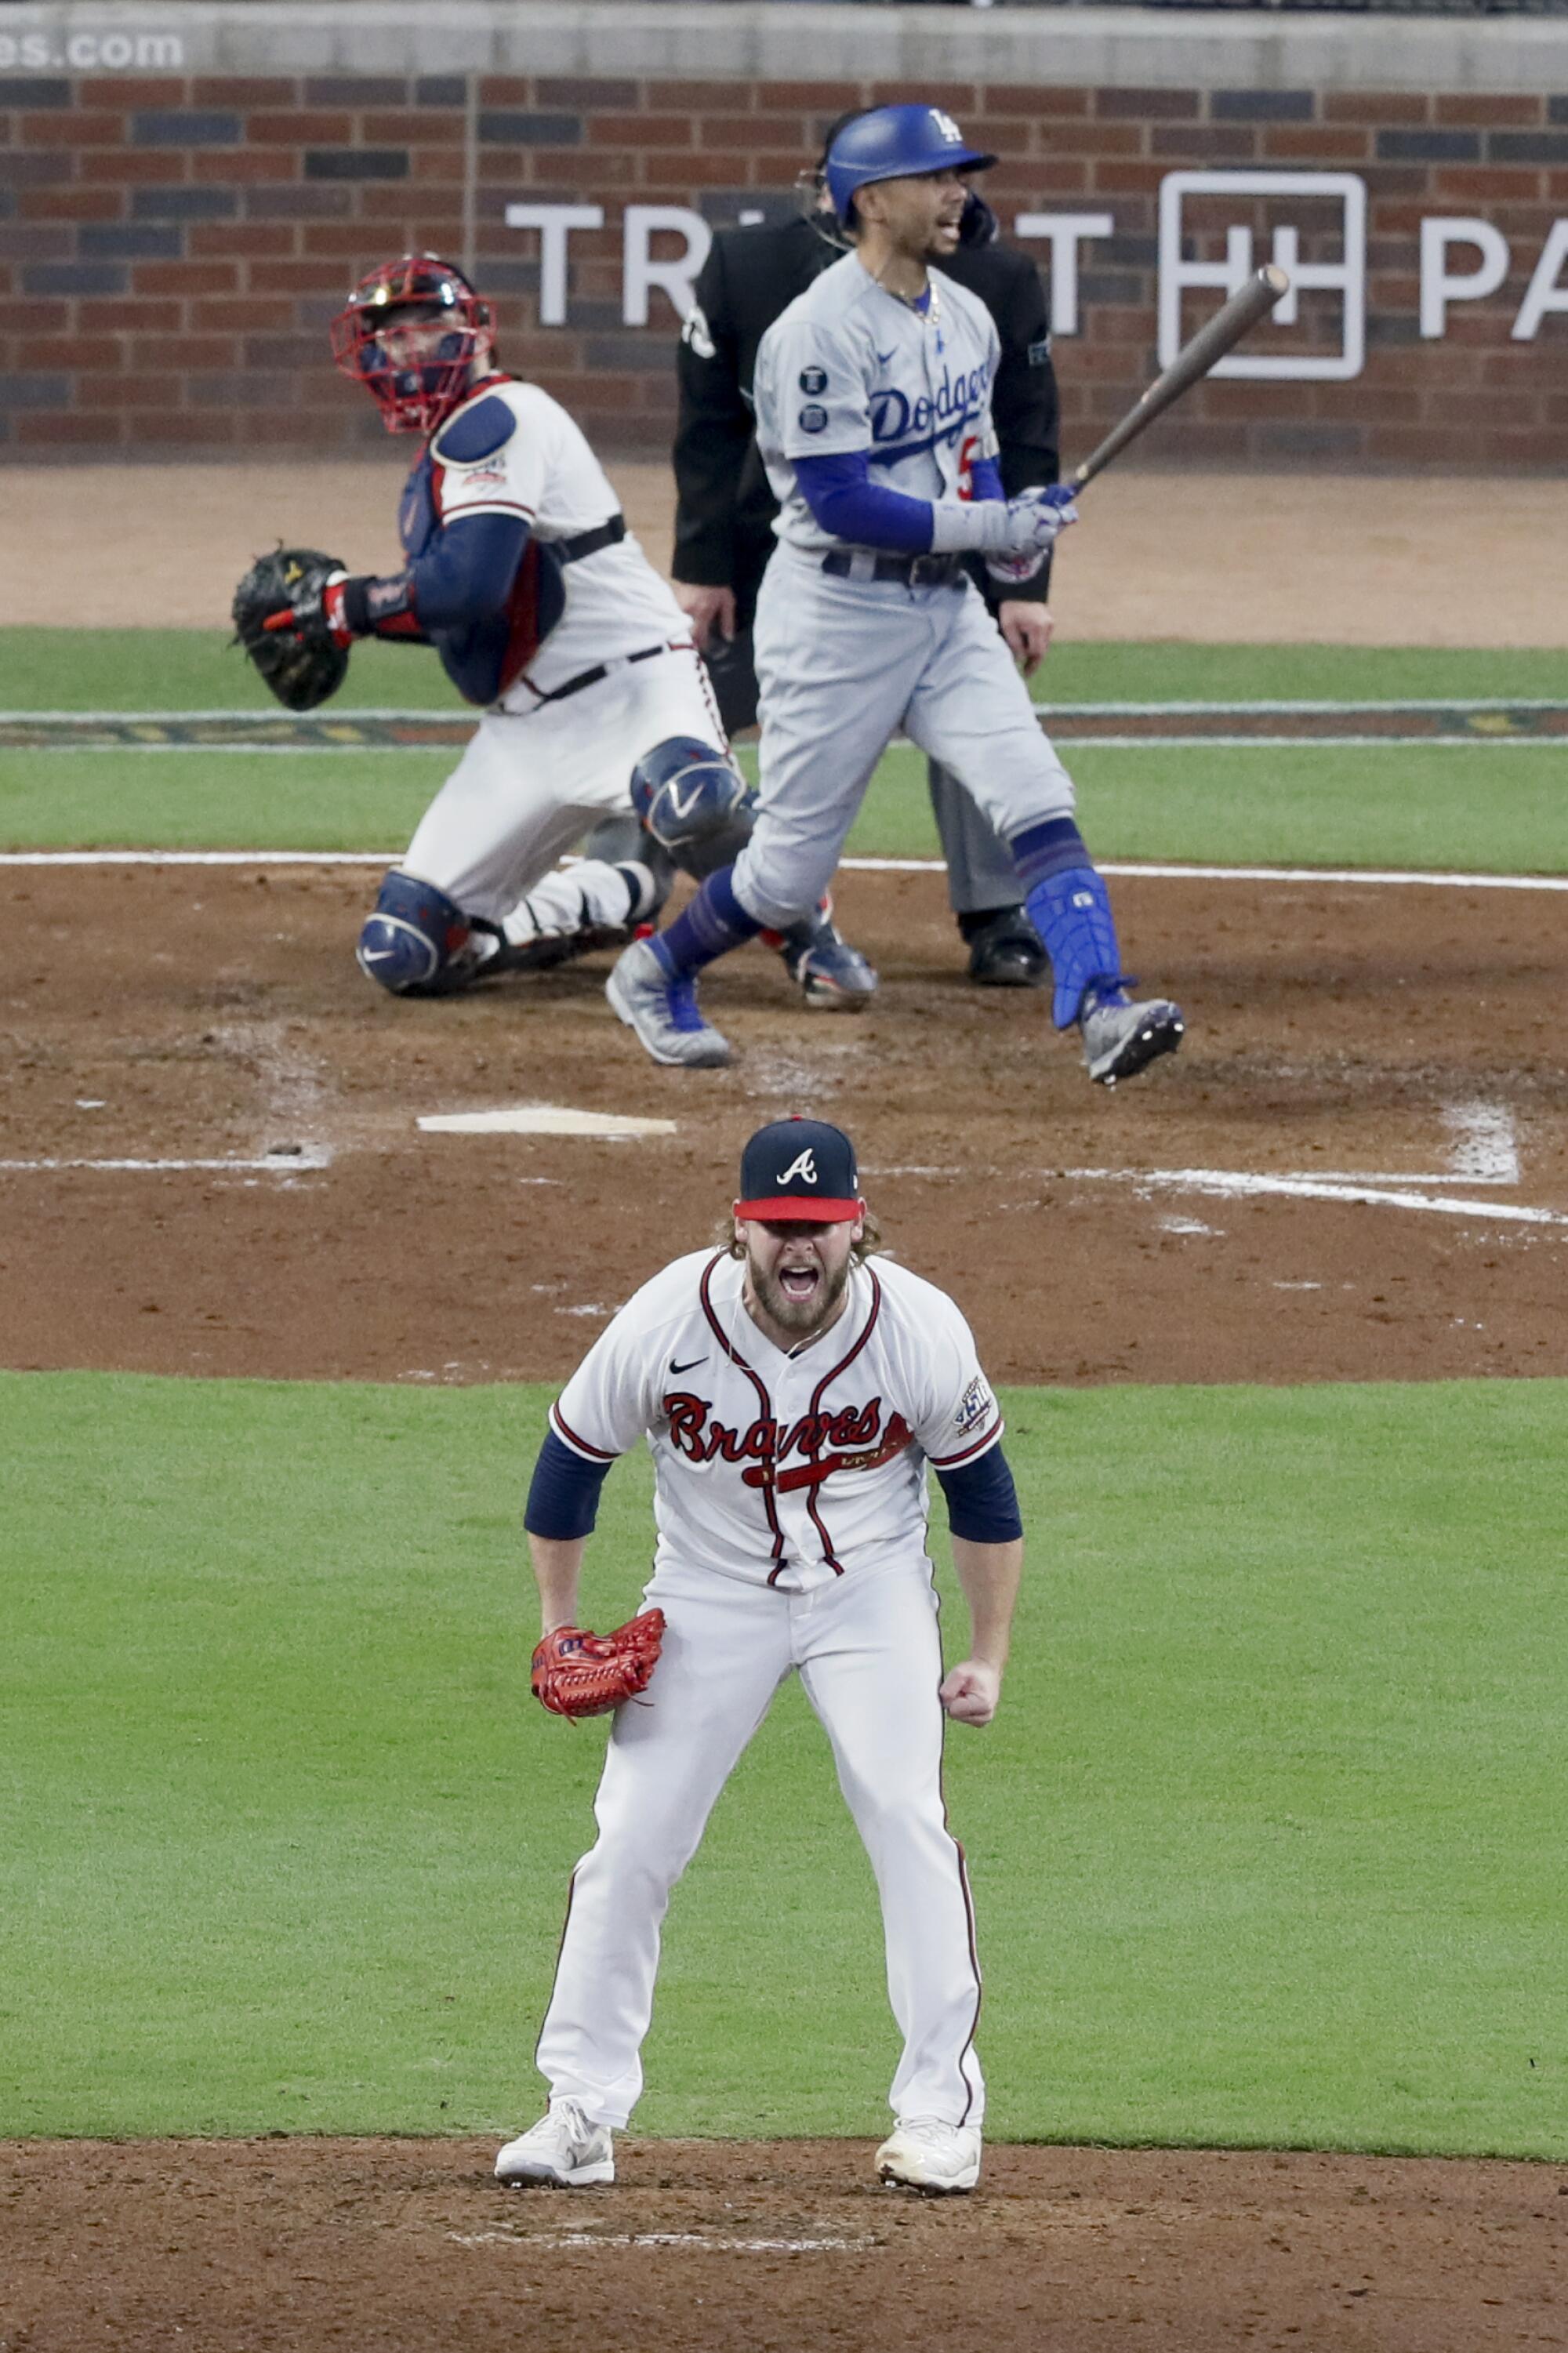 Braves relief pitcher A.J. Minter, bottom, reacts after striking out Mookie Betts.